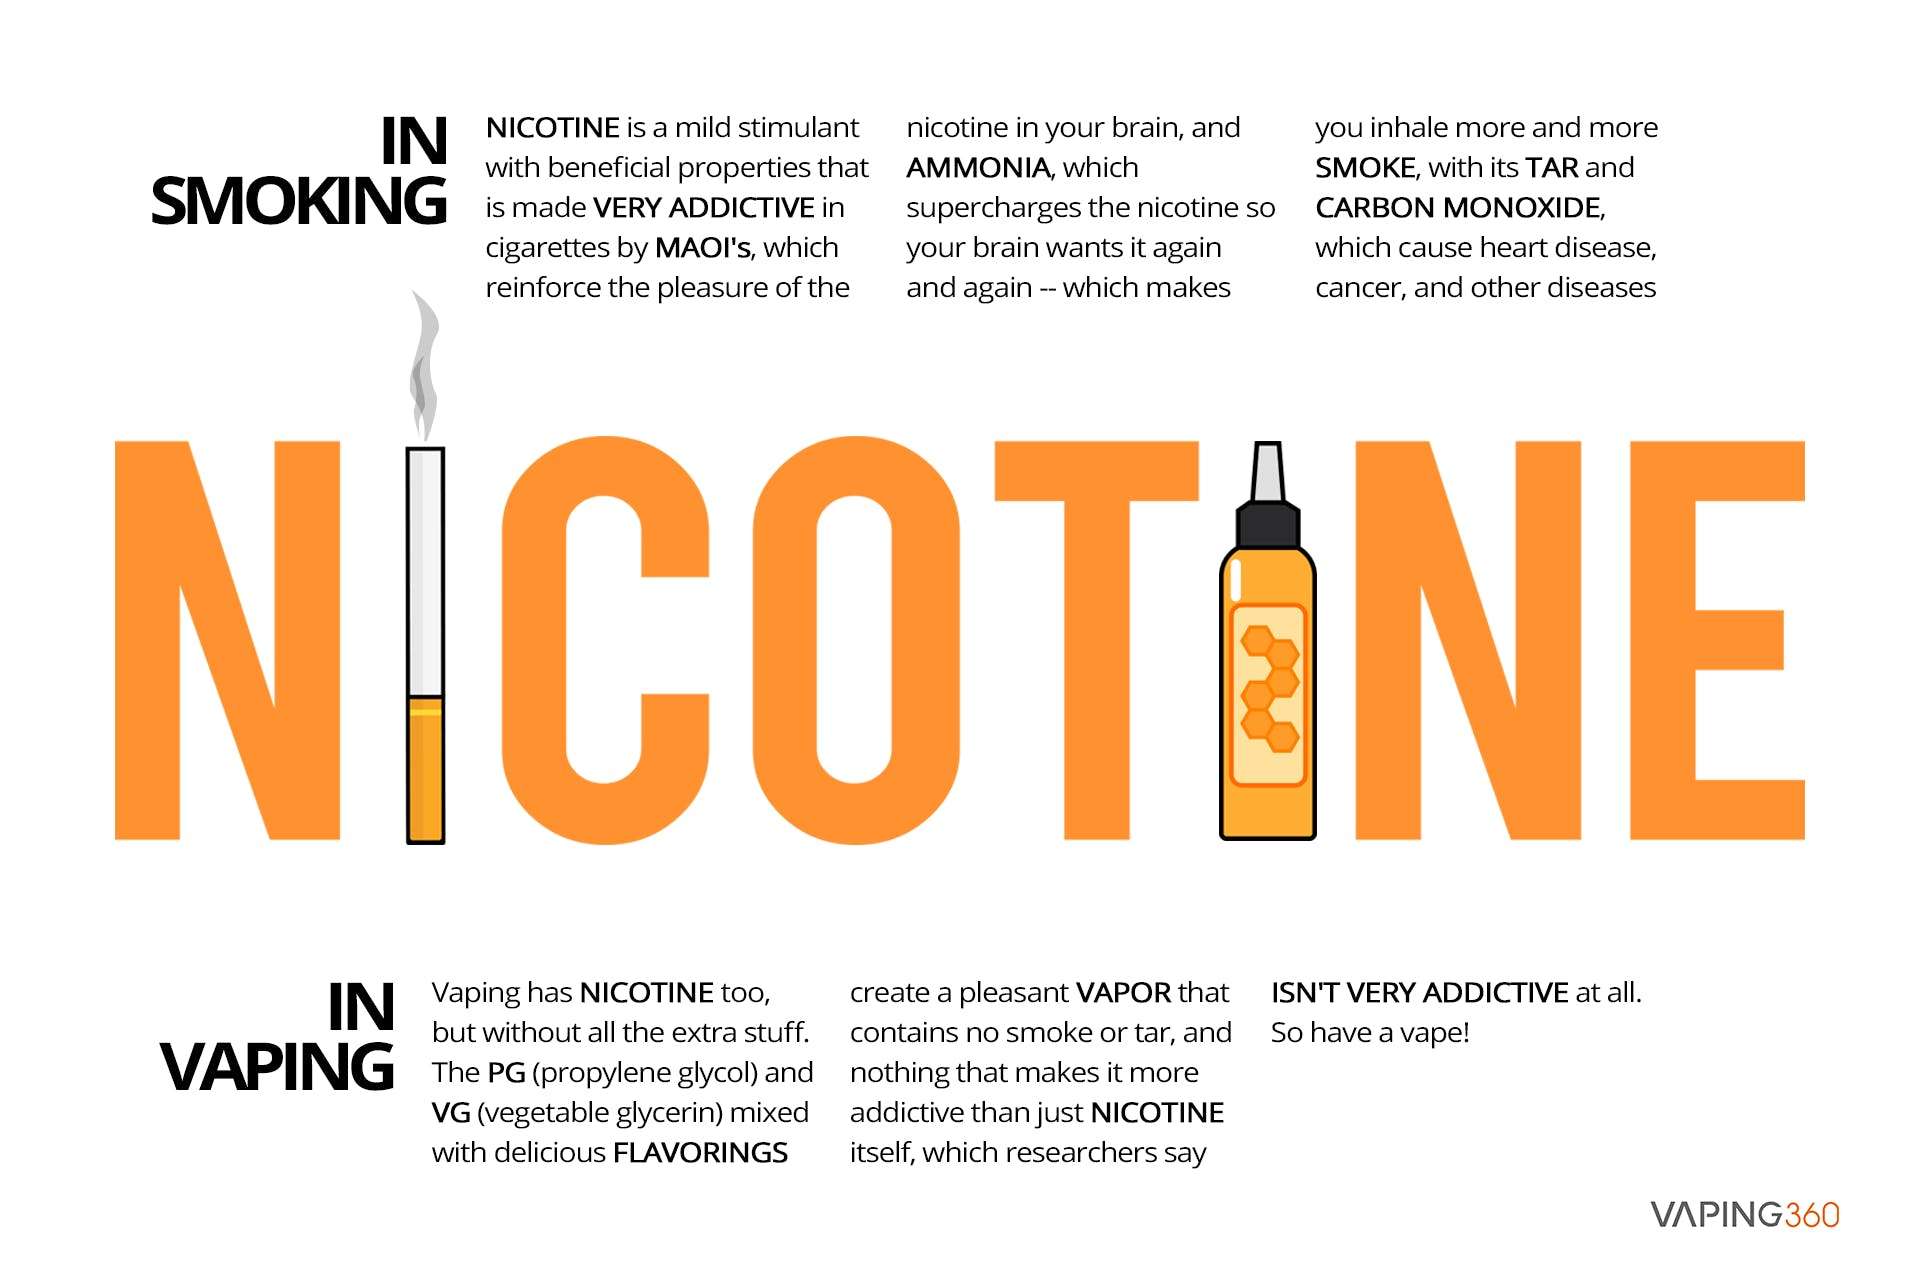 How Much Nicotine Is In A Cigarette?